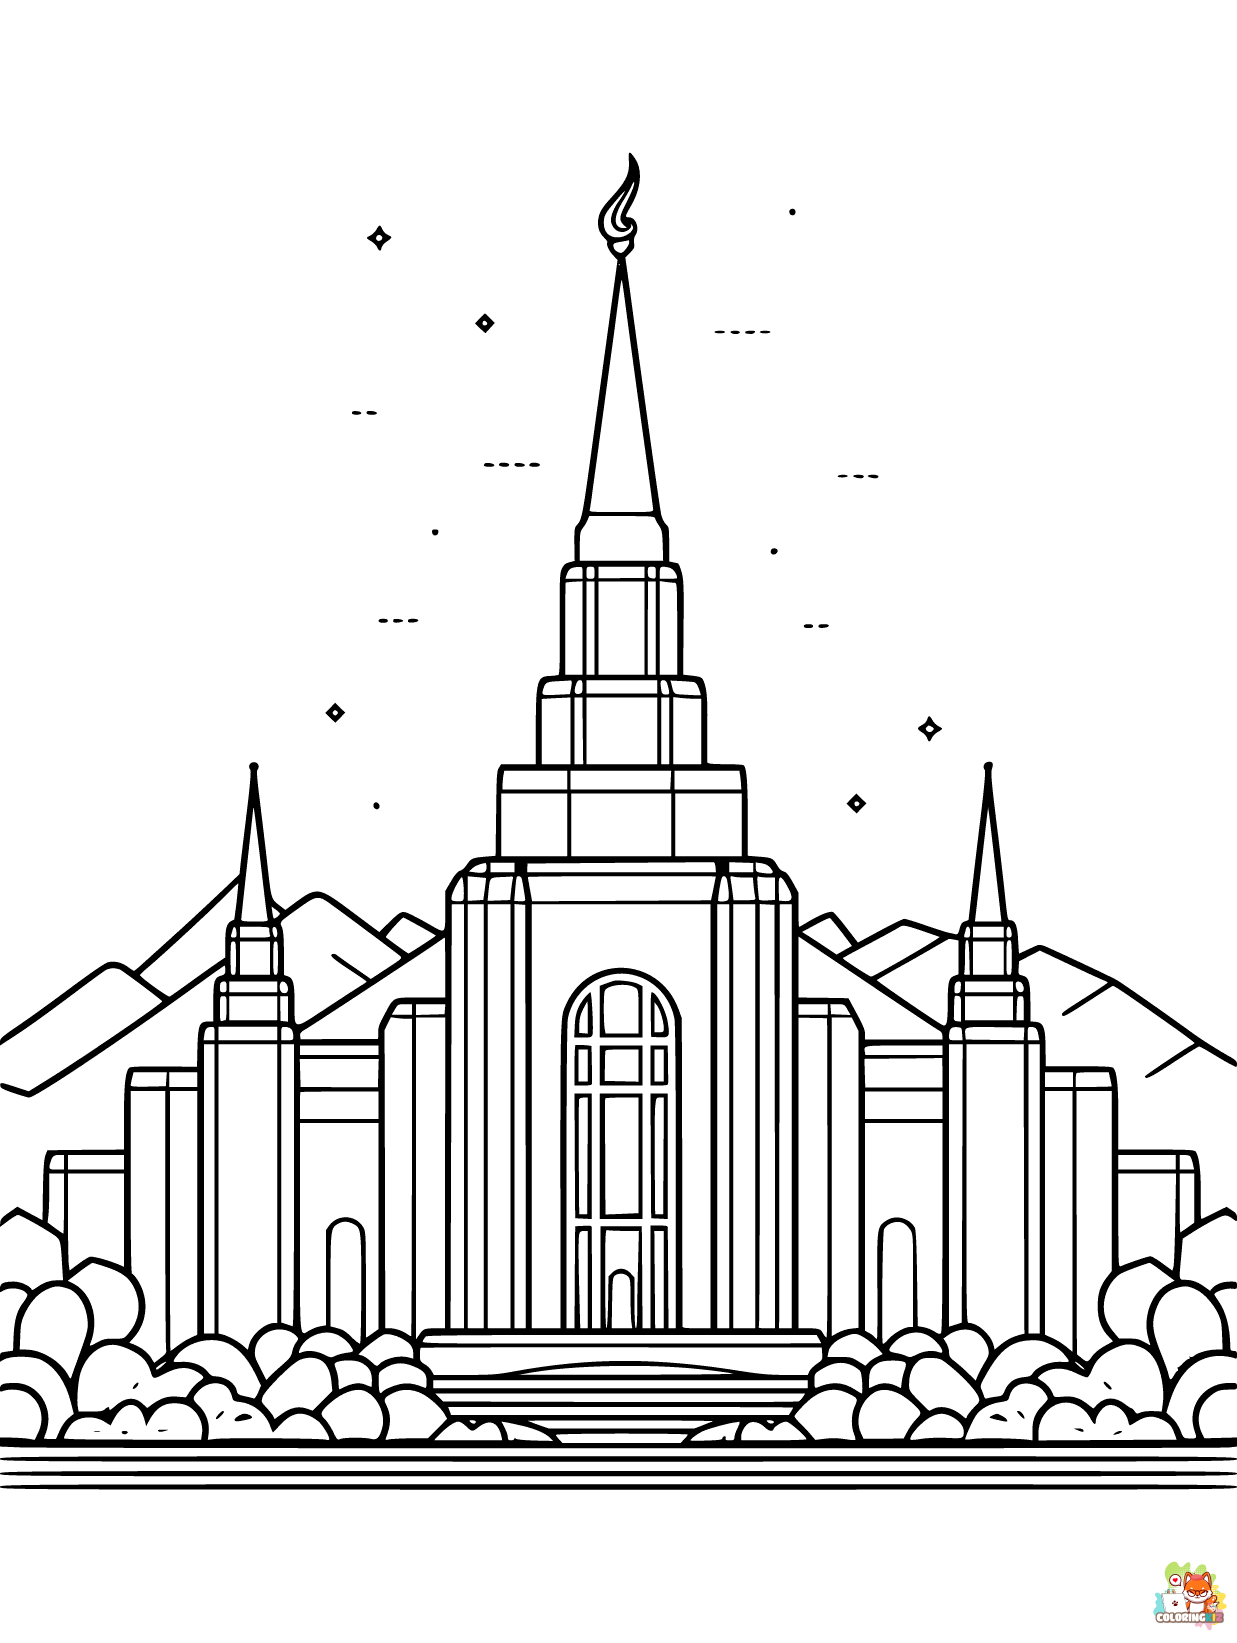 LDS Temple coloring pages printable 1